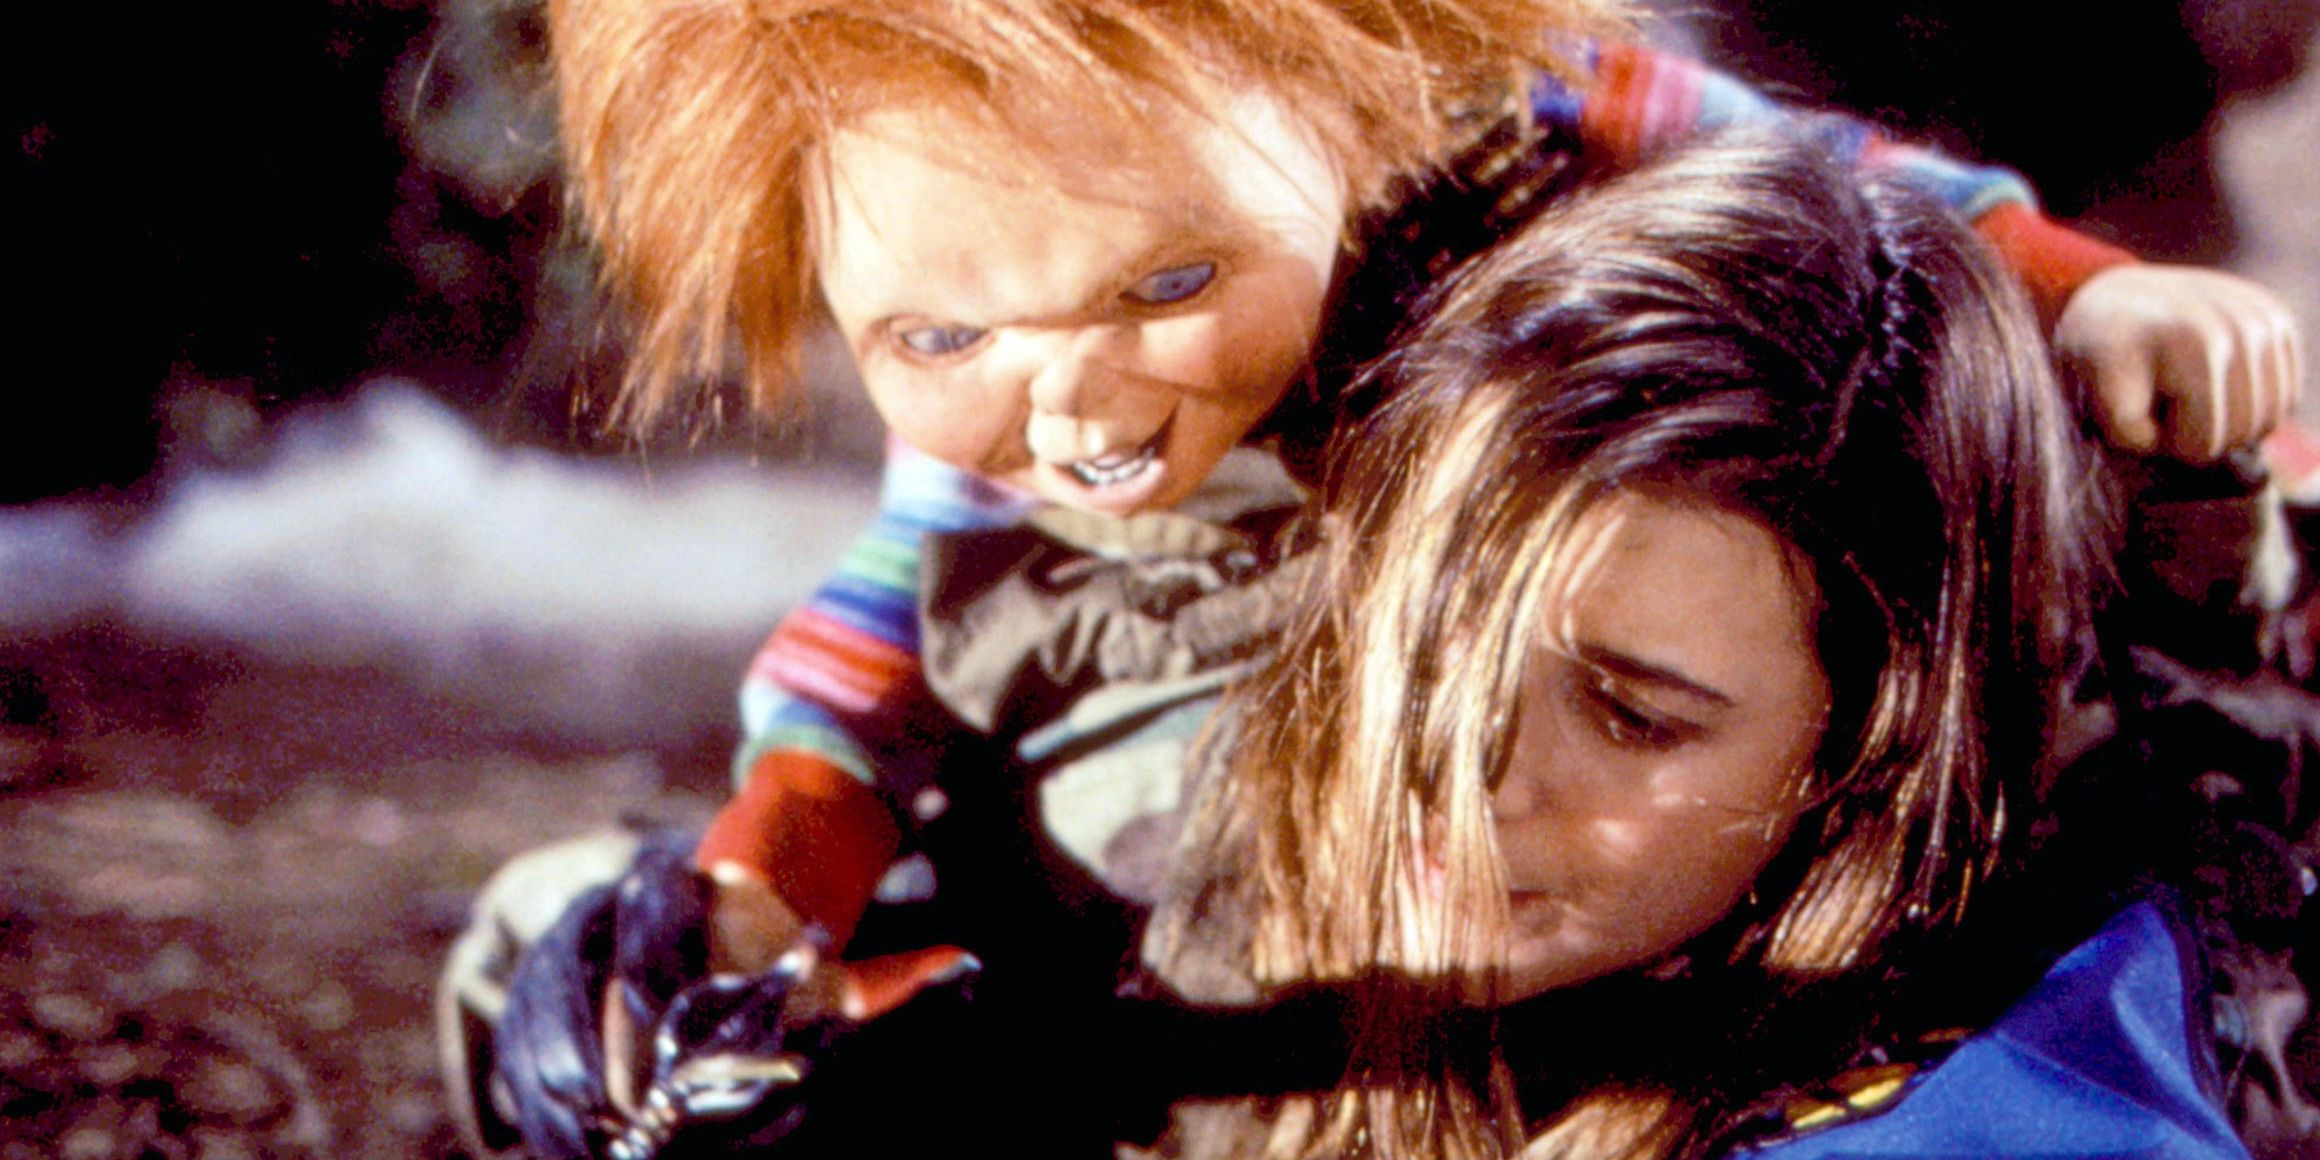 Chucky attacking Silva in Childs Play 3